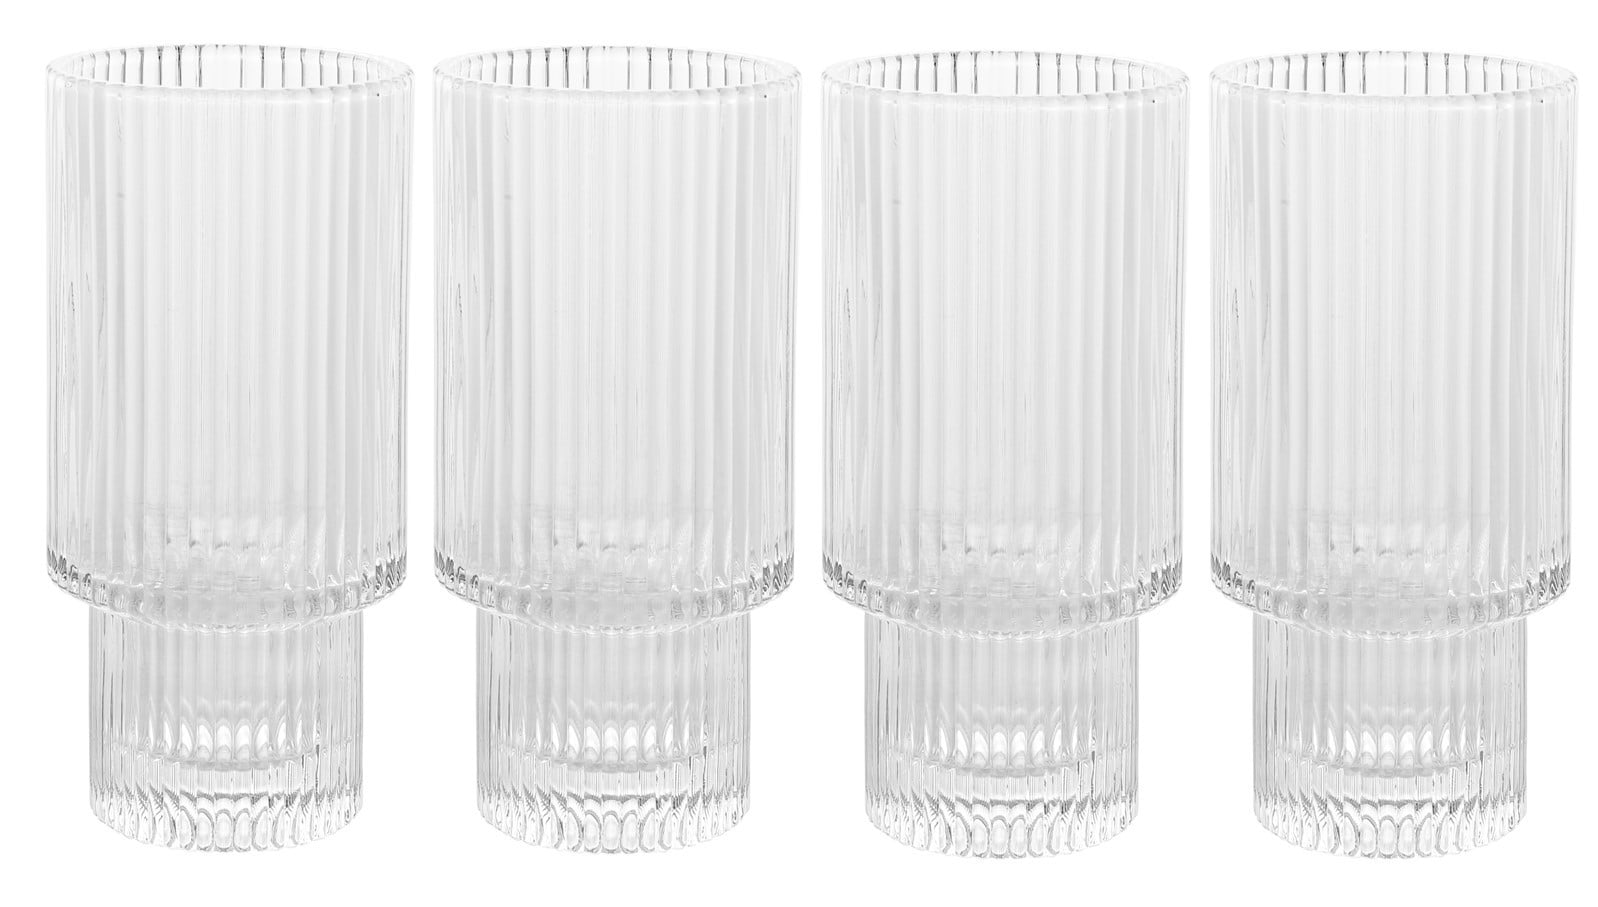 Vintage Art Deco Fluted Drinking Glasses - 9 oz Modern Kitchen Glassware Set  Old Fashion Tumbler Cups for Weddings, Cocktails, Bar Ribbed Lowball Glass  Cup for Water, Gin, Whiskey- Set of 4